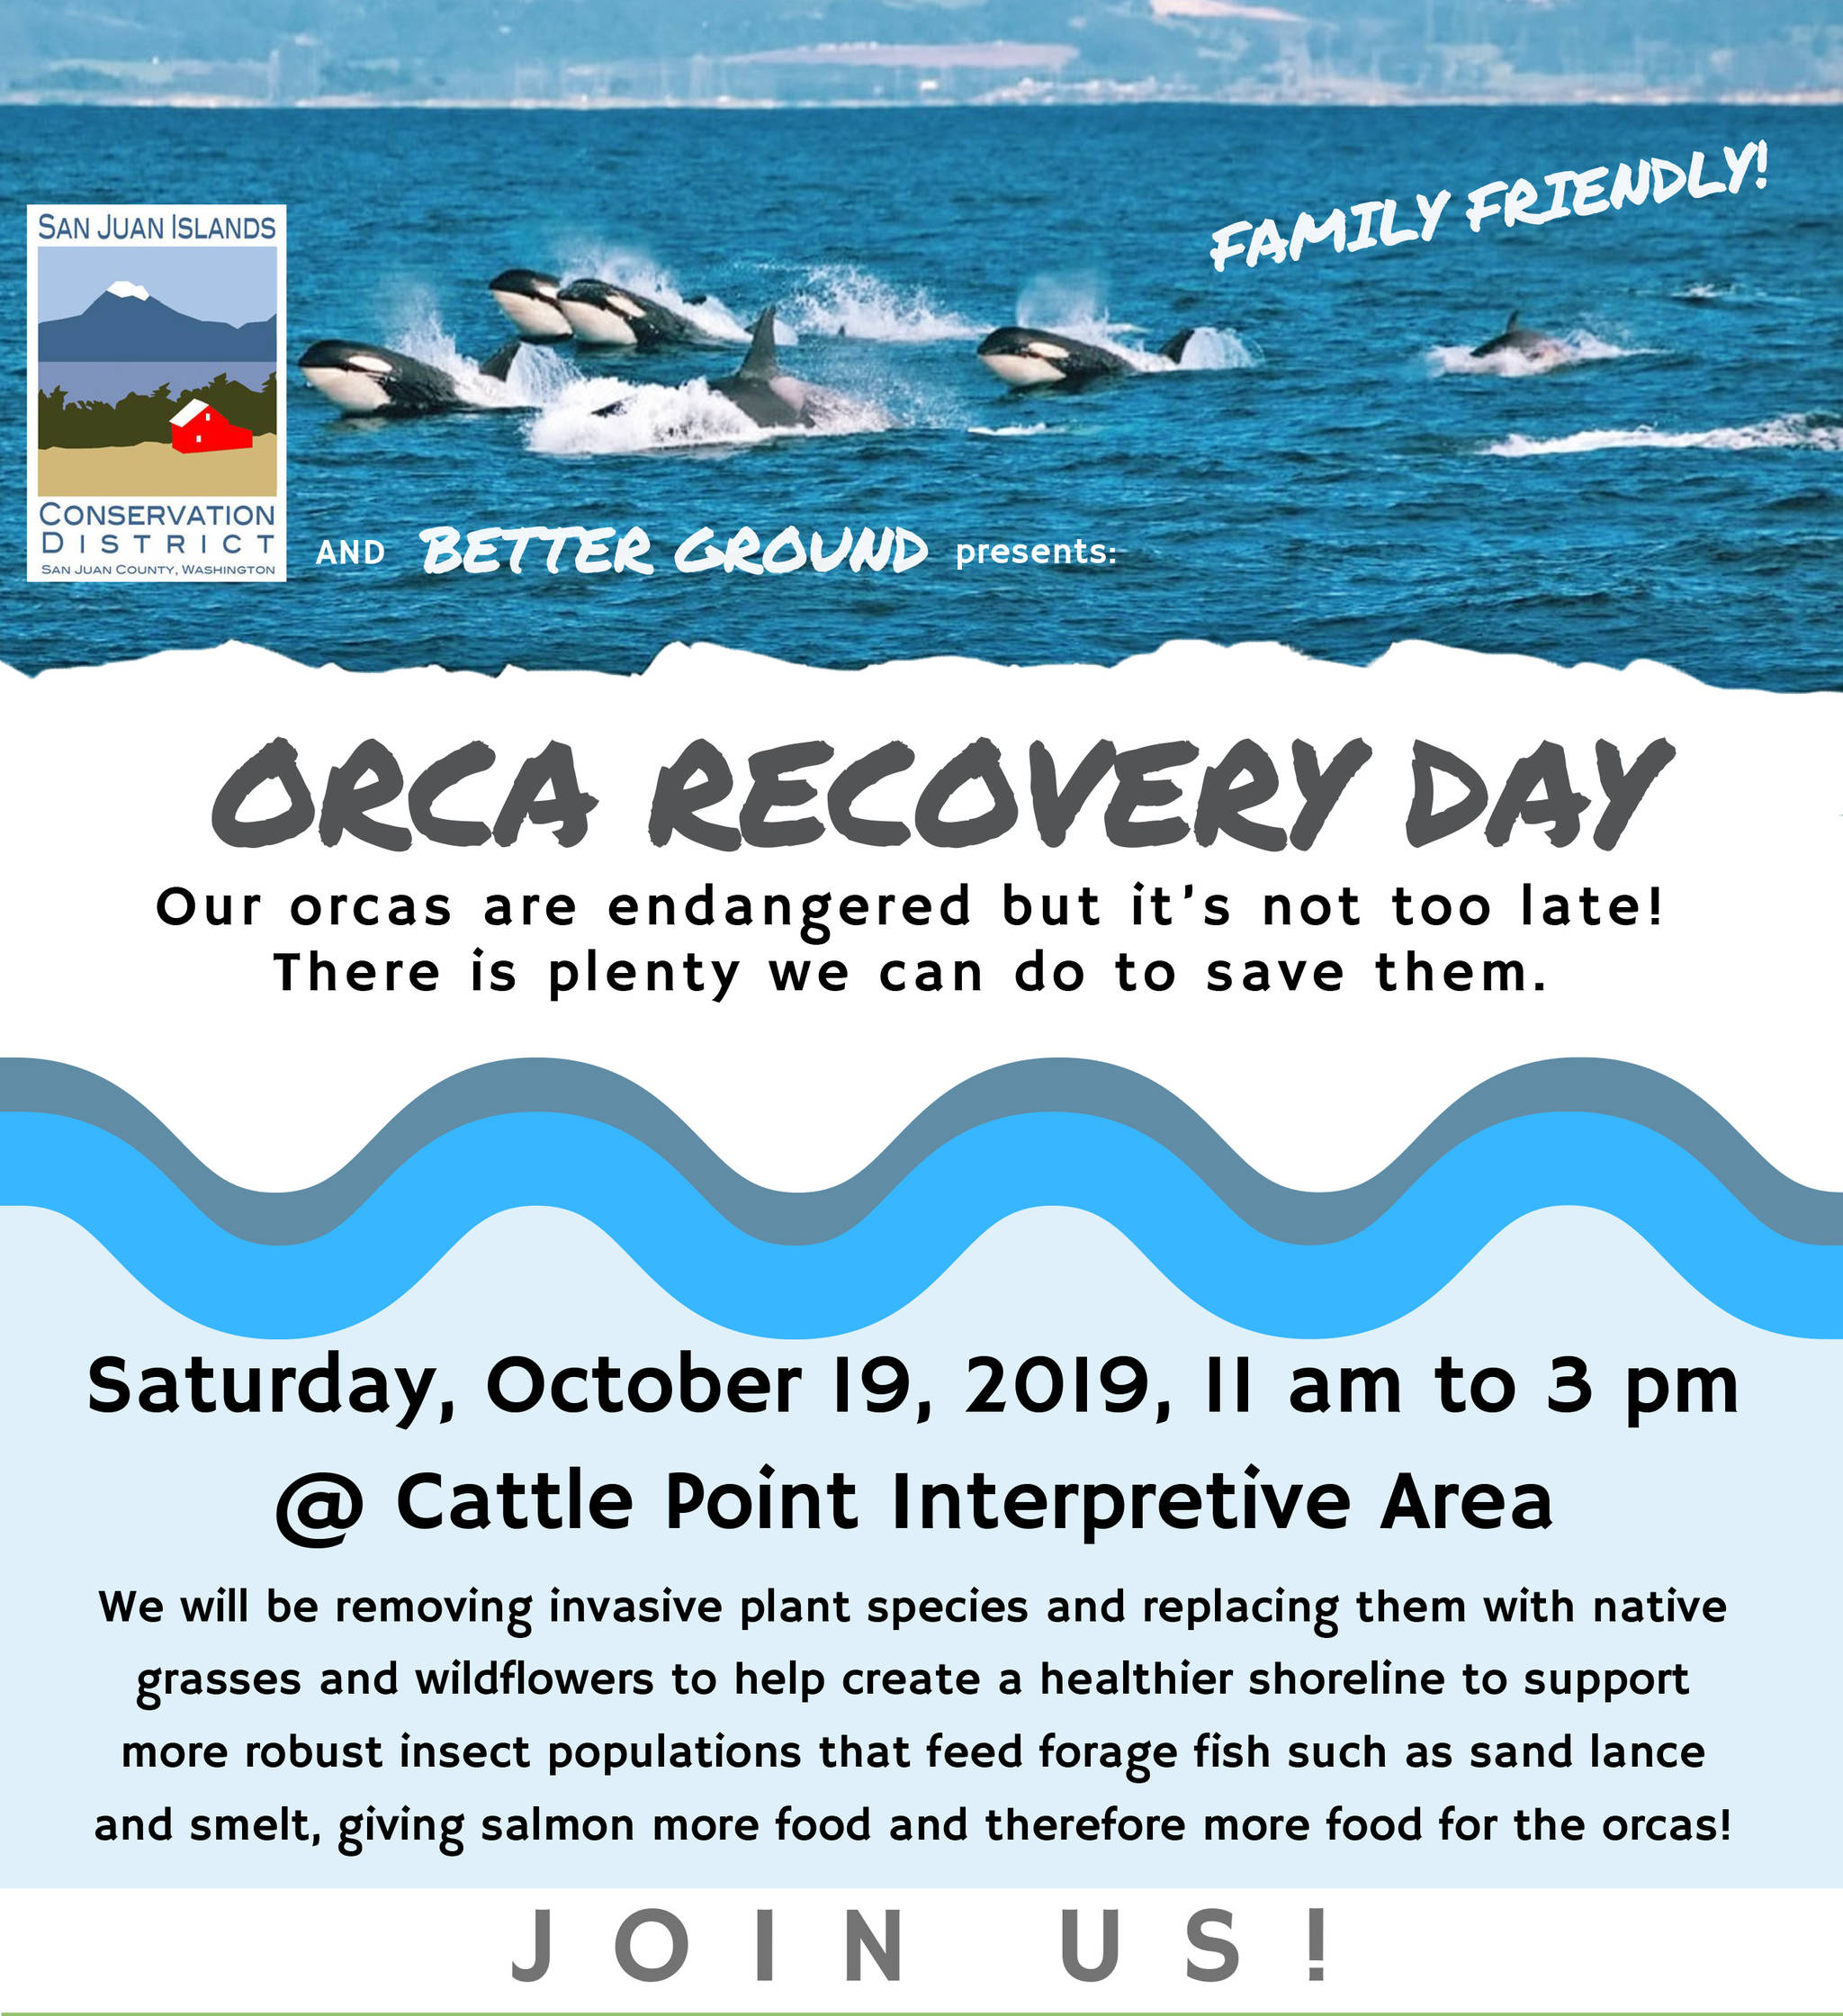 Conservation district to hold event in honor of orcas